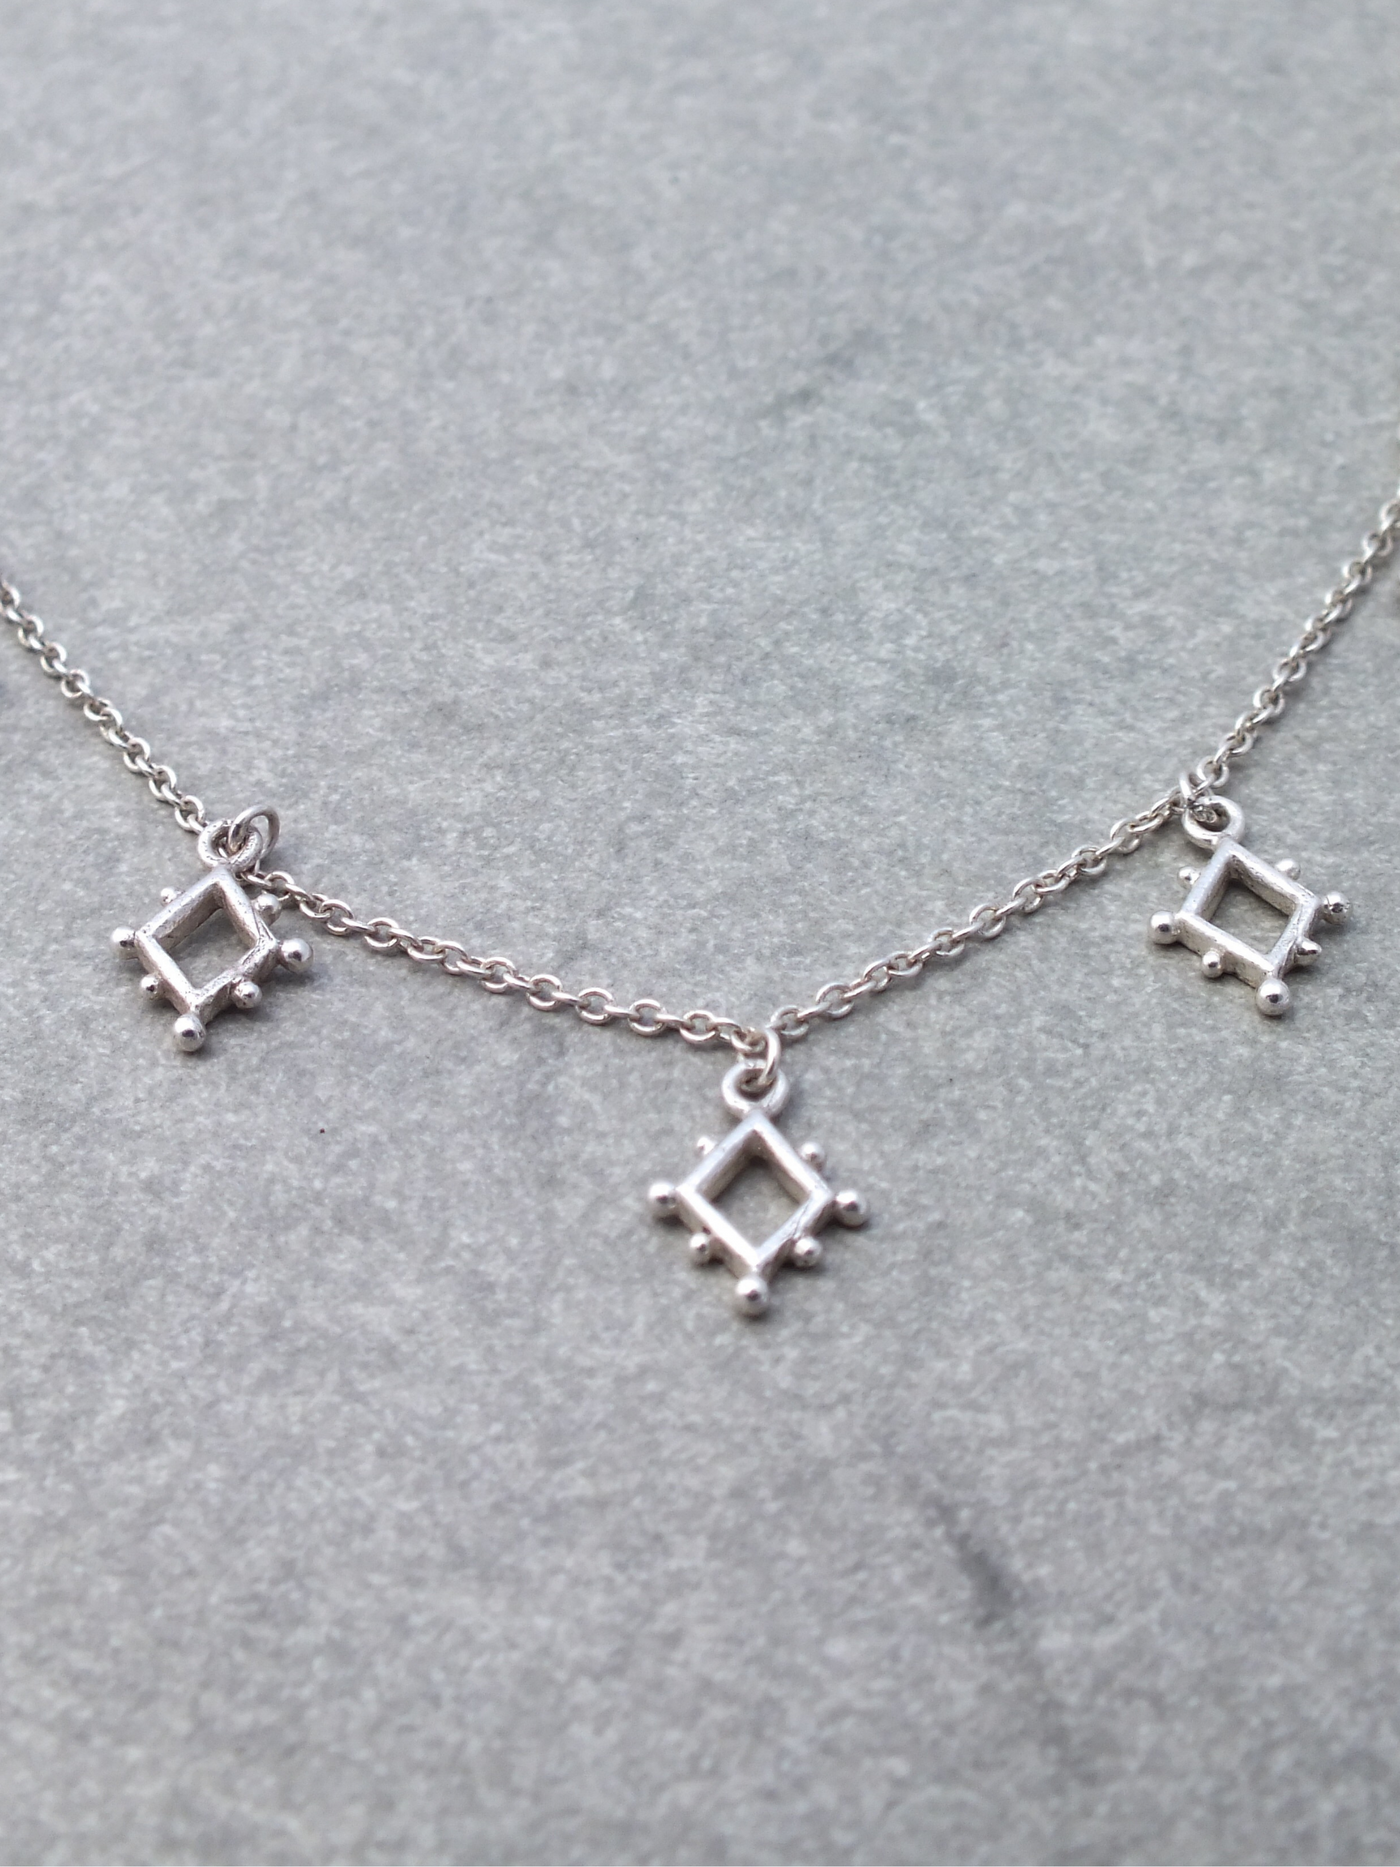 Etruscan Necklace in Sterling Silver